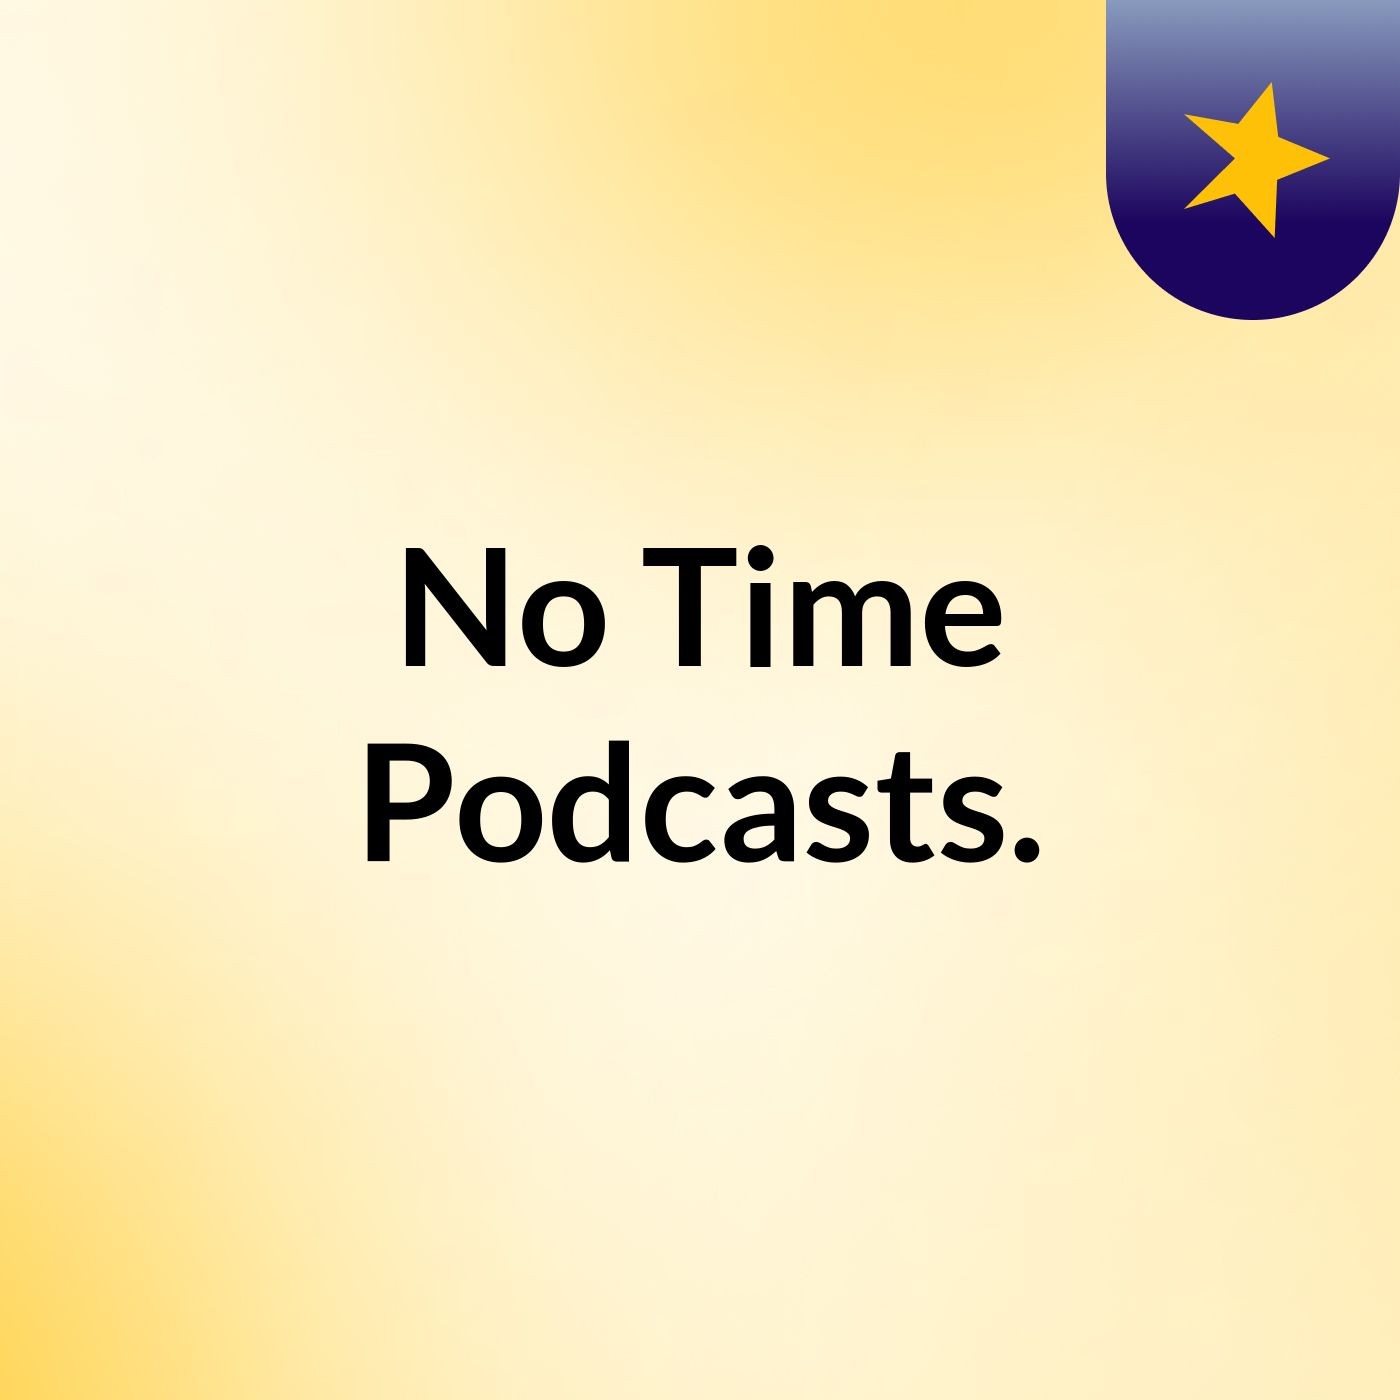 No Time Podcasts.